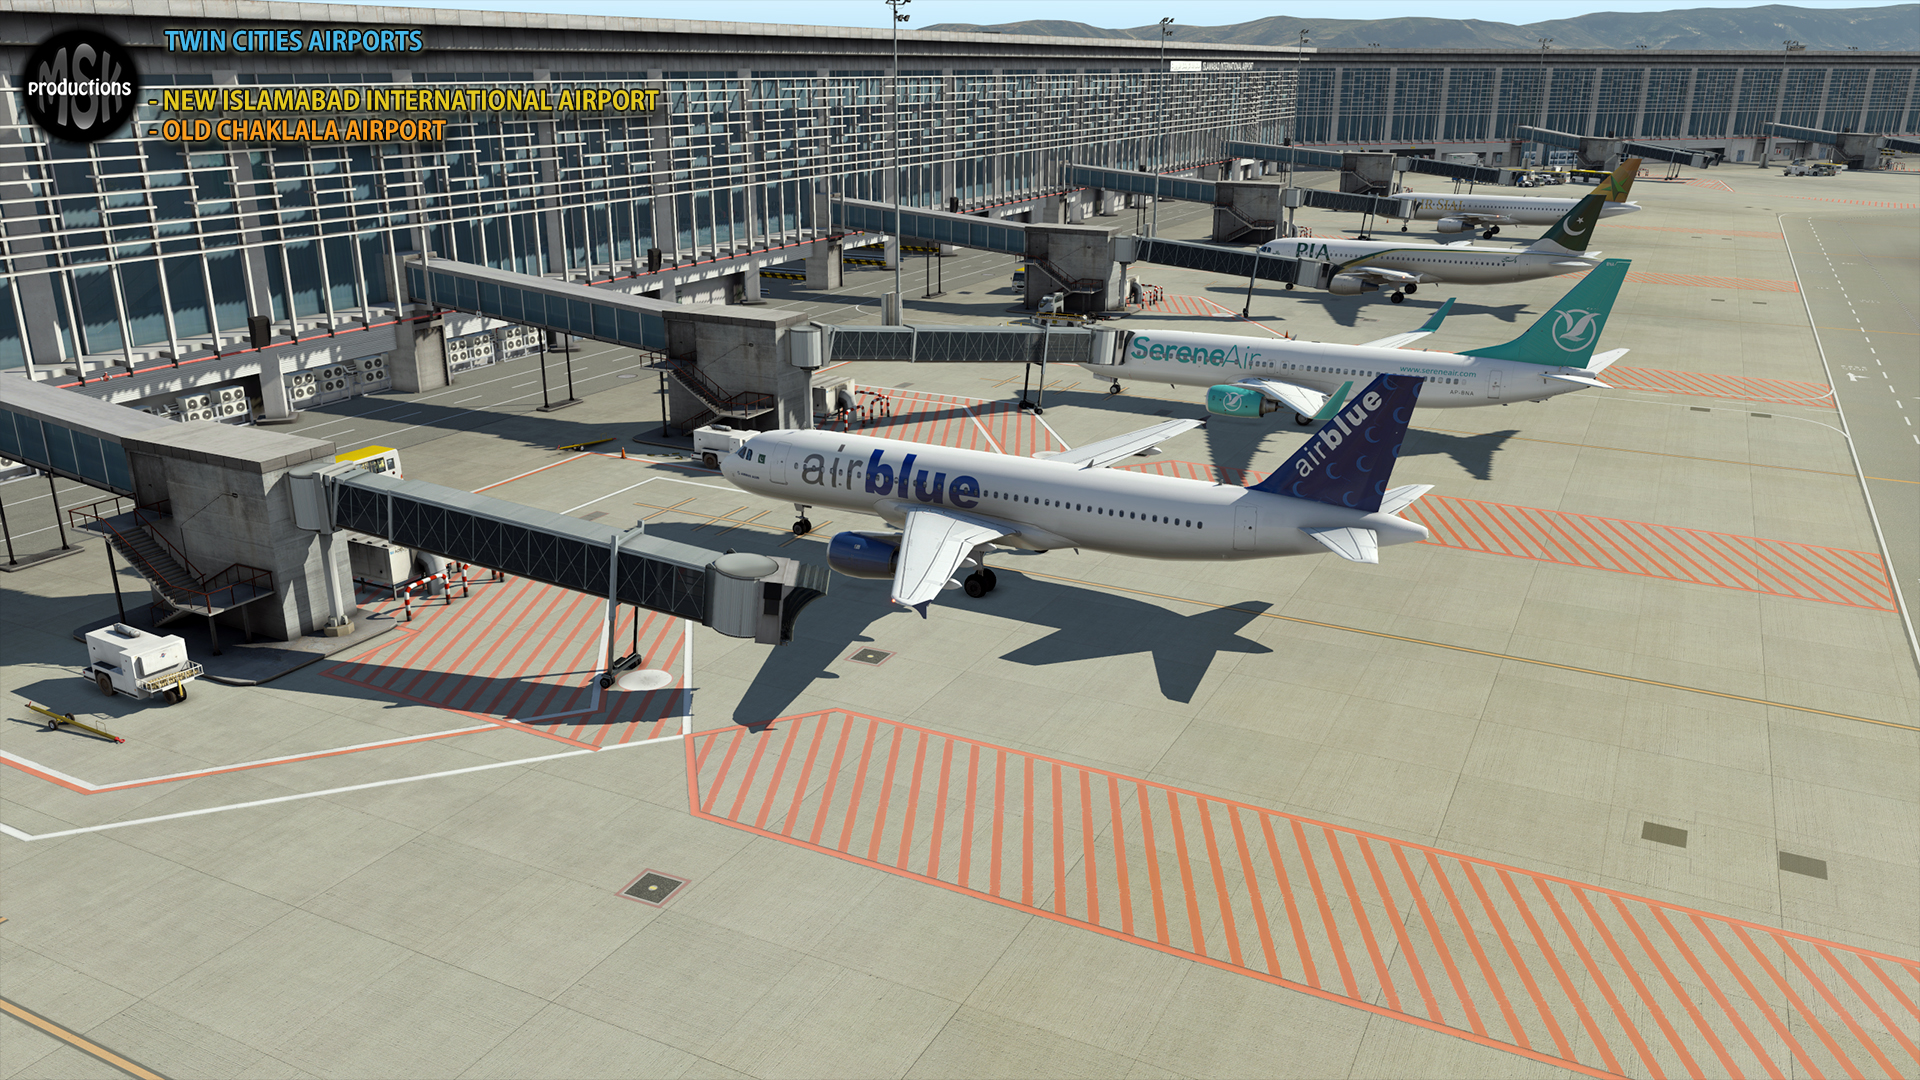 MSK Productions Releases Islamabad International Airport for XP11 - MSK Productions